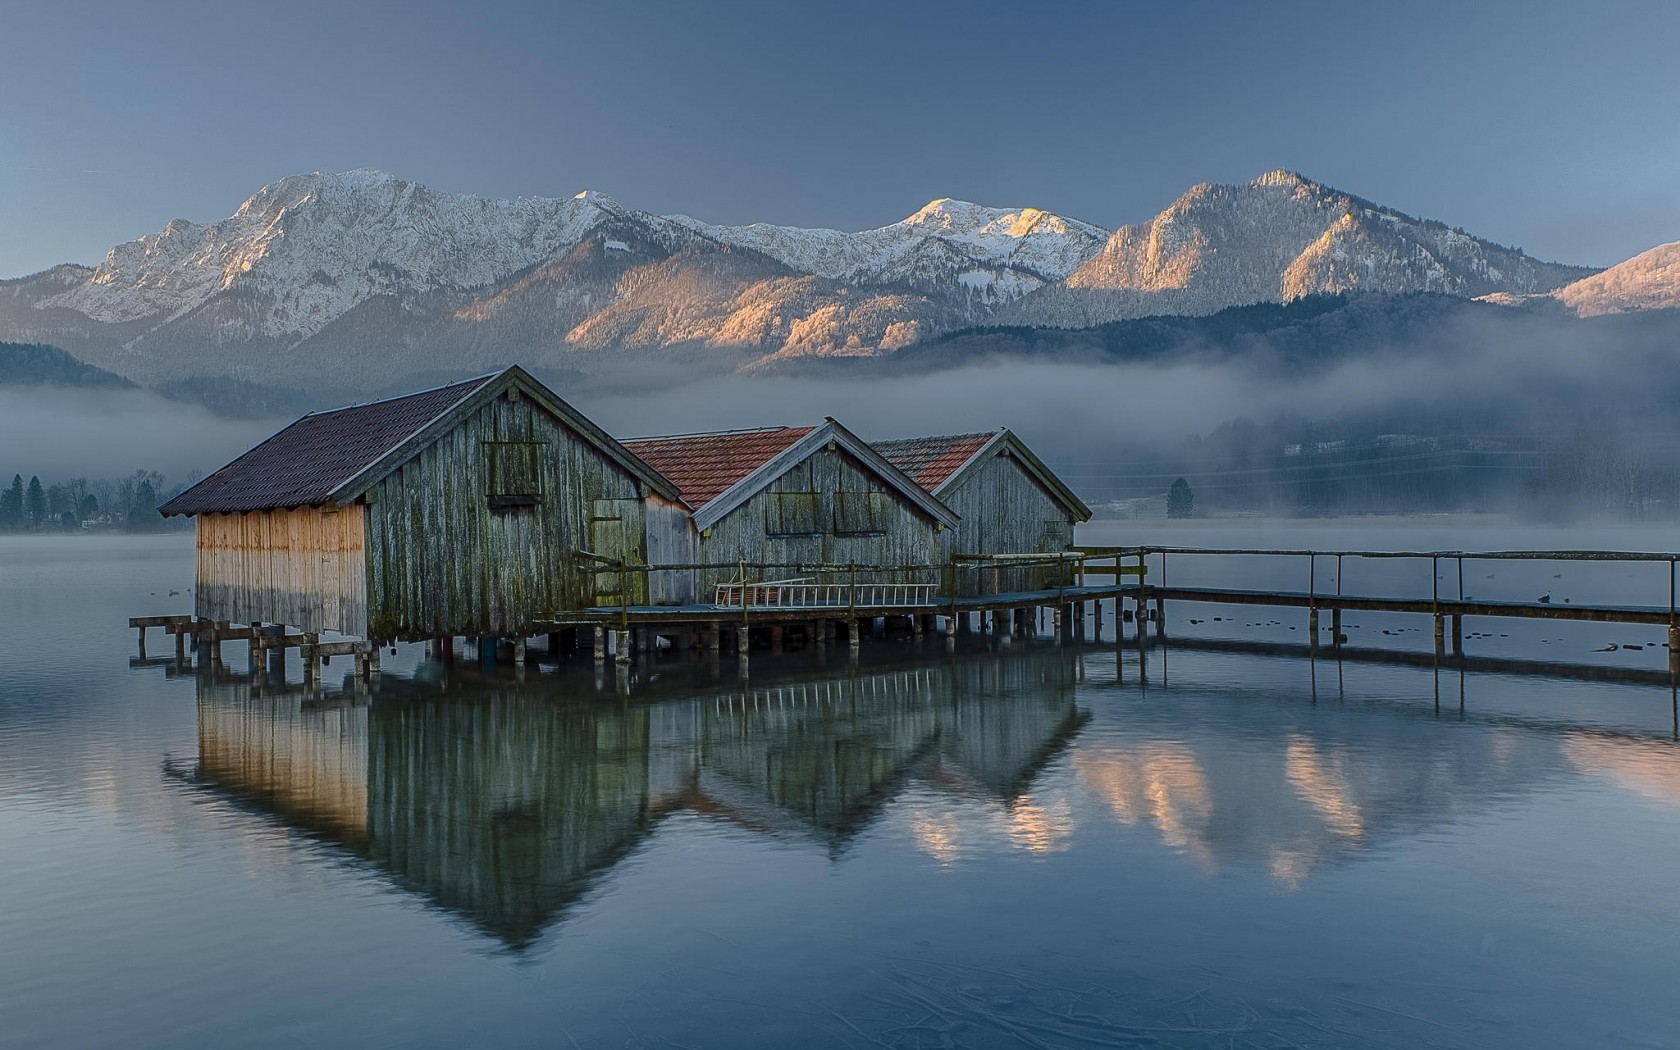 General 1680x1050 nature landscape mountains snow water Germany house mist trees forest sunlight reflection pier lake boathouses